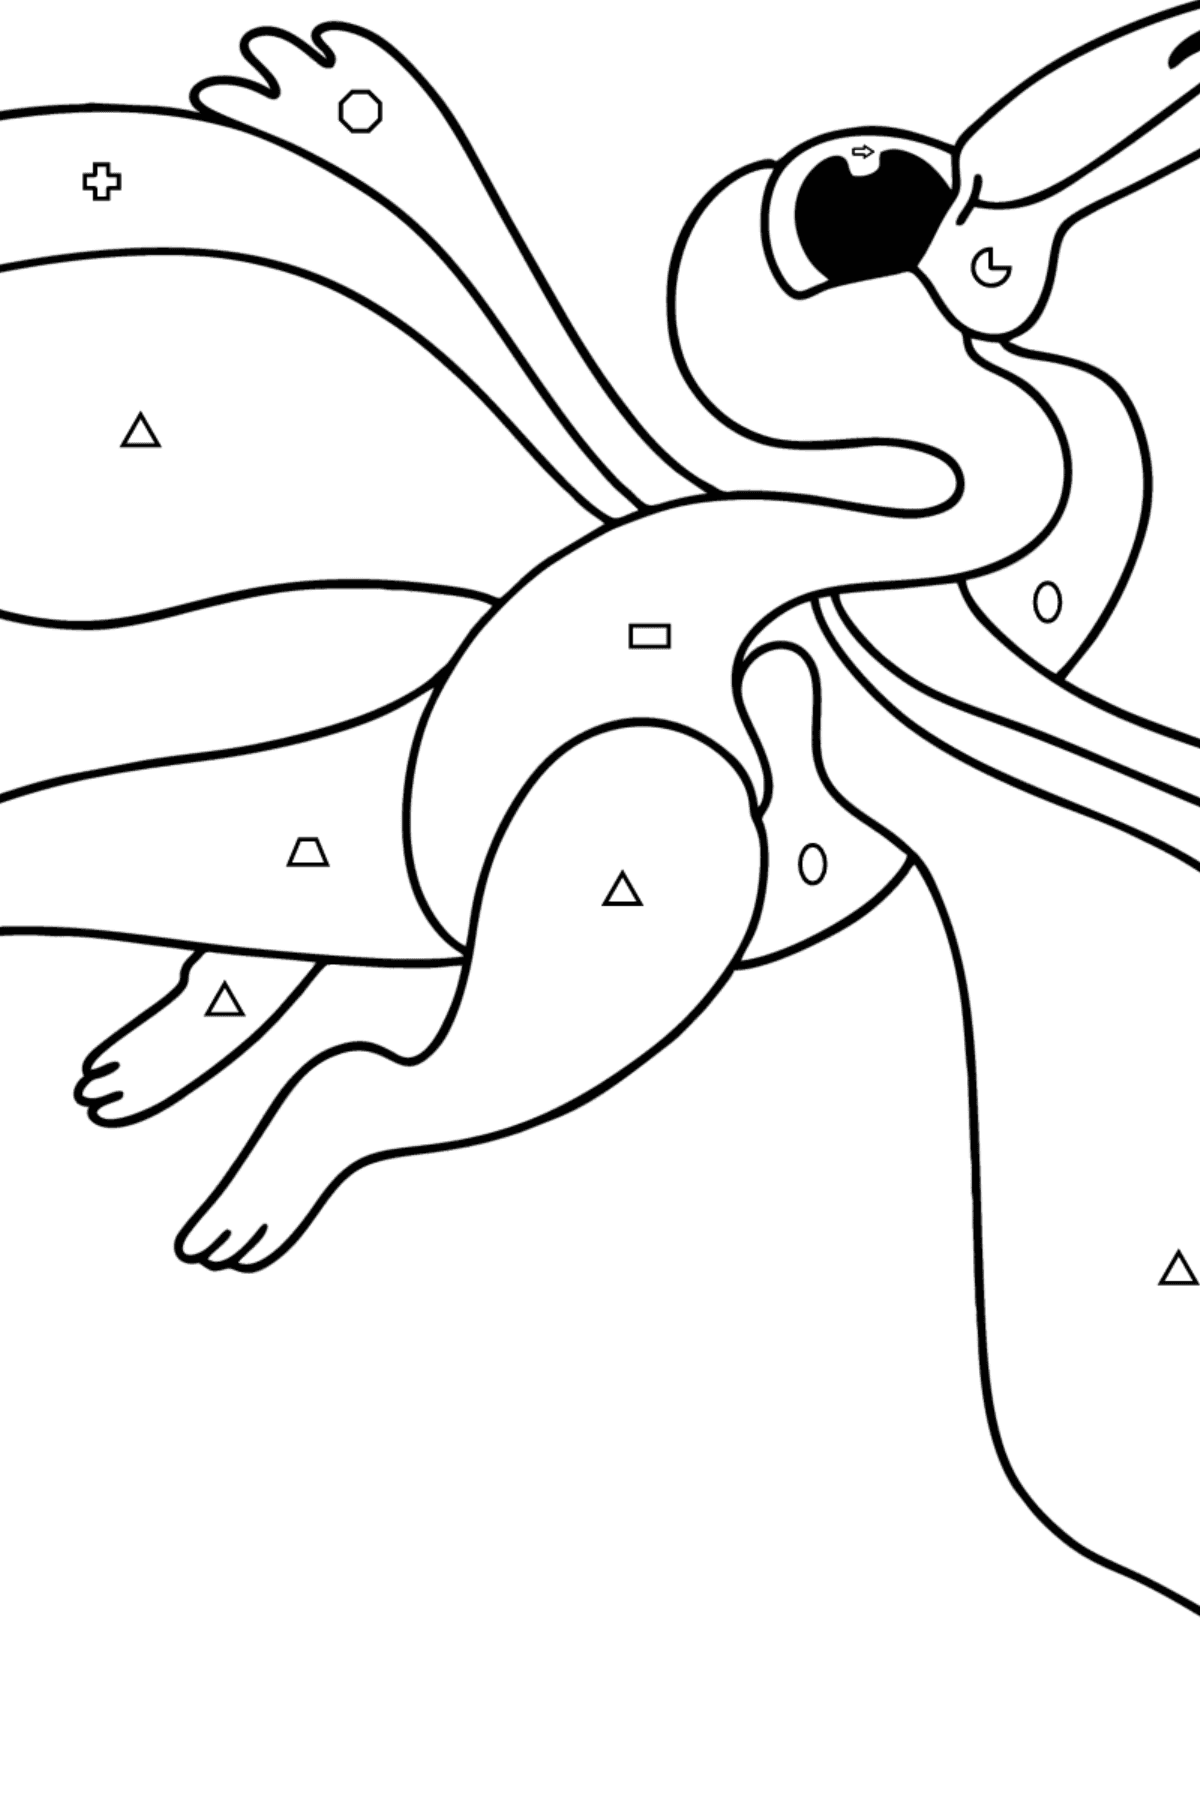 Pterodactyl coloring page - Coloring by Geometric Shapes for Kids